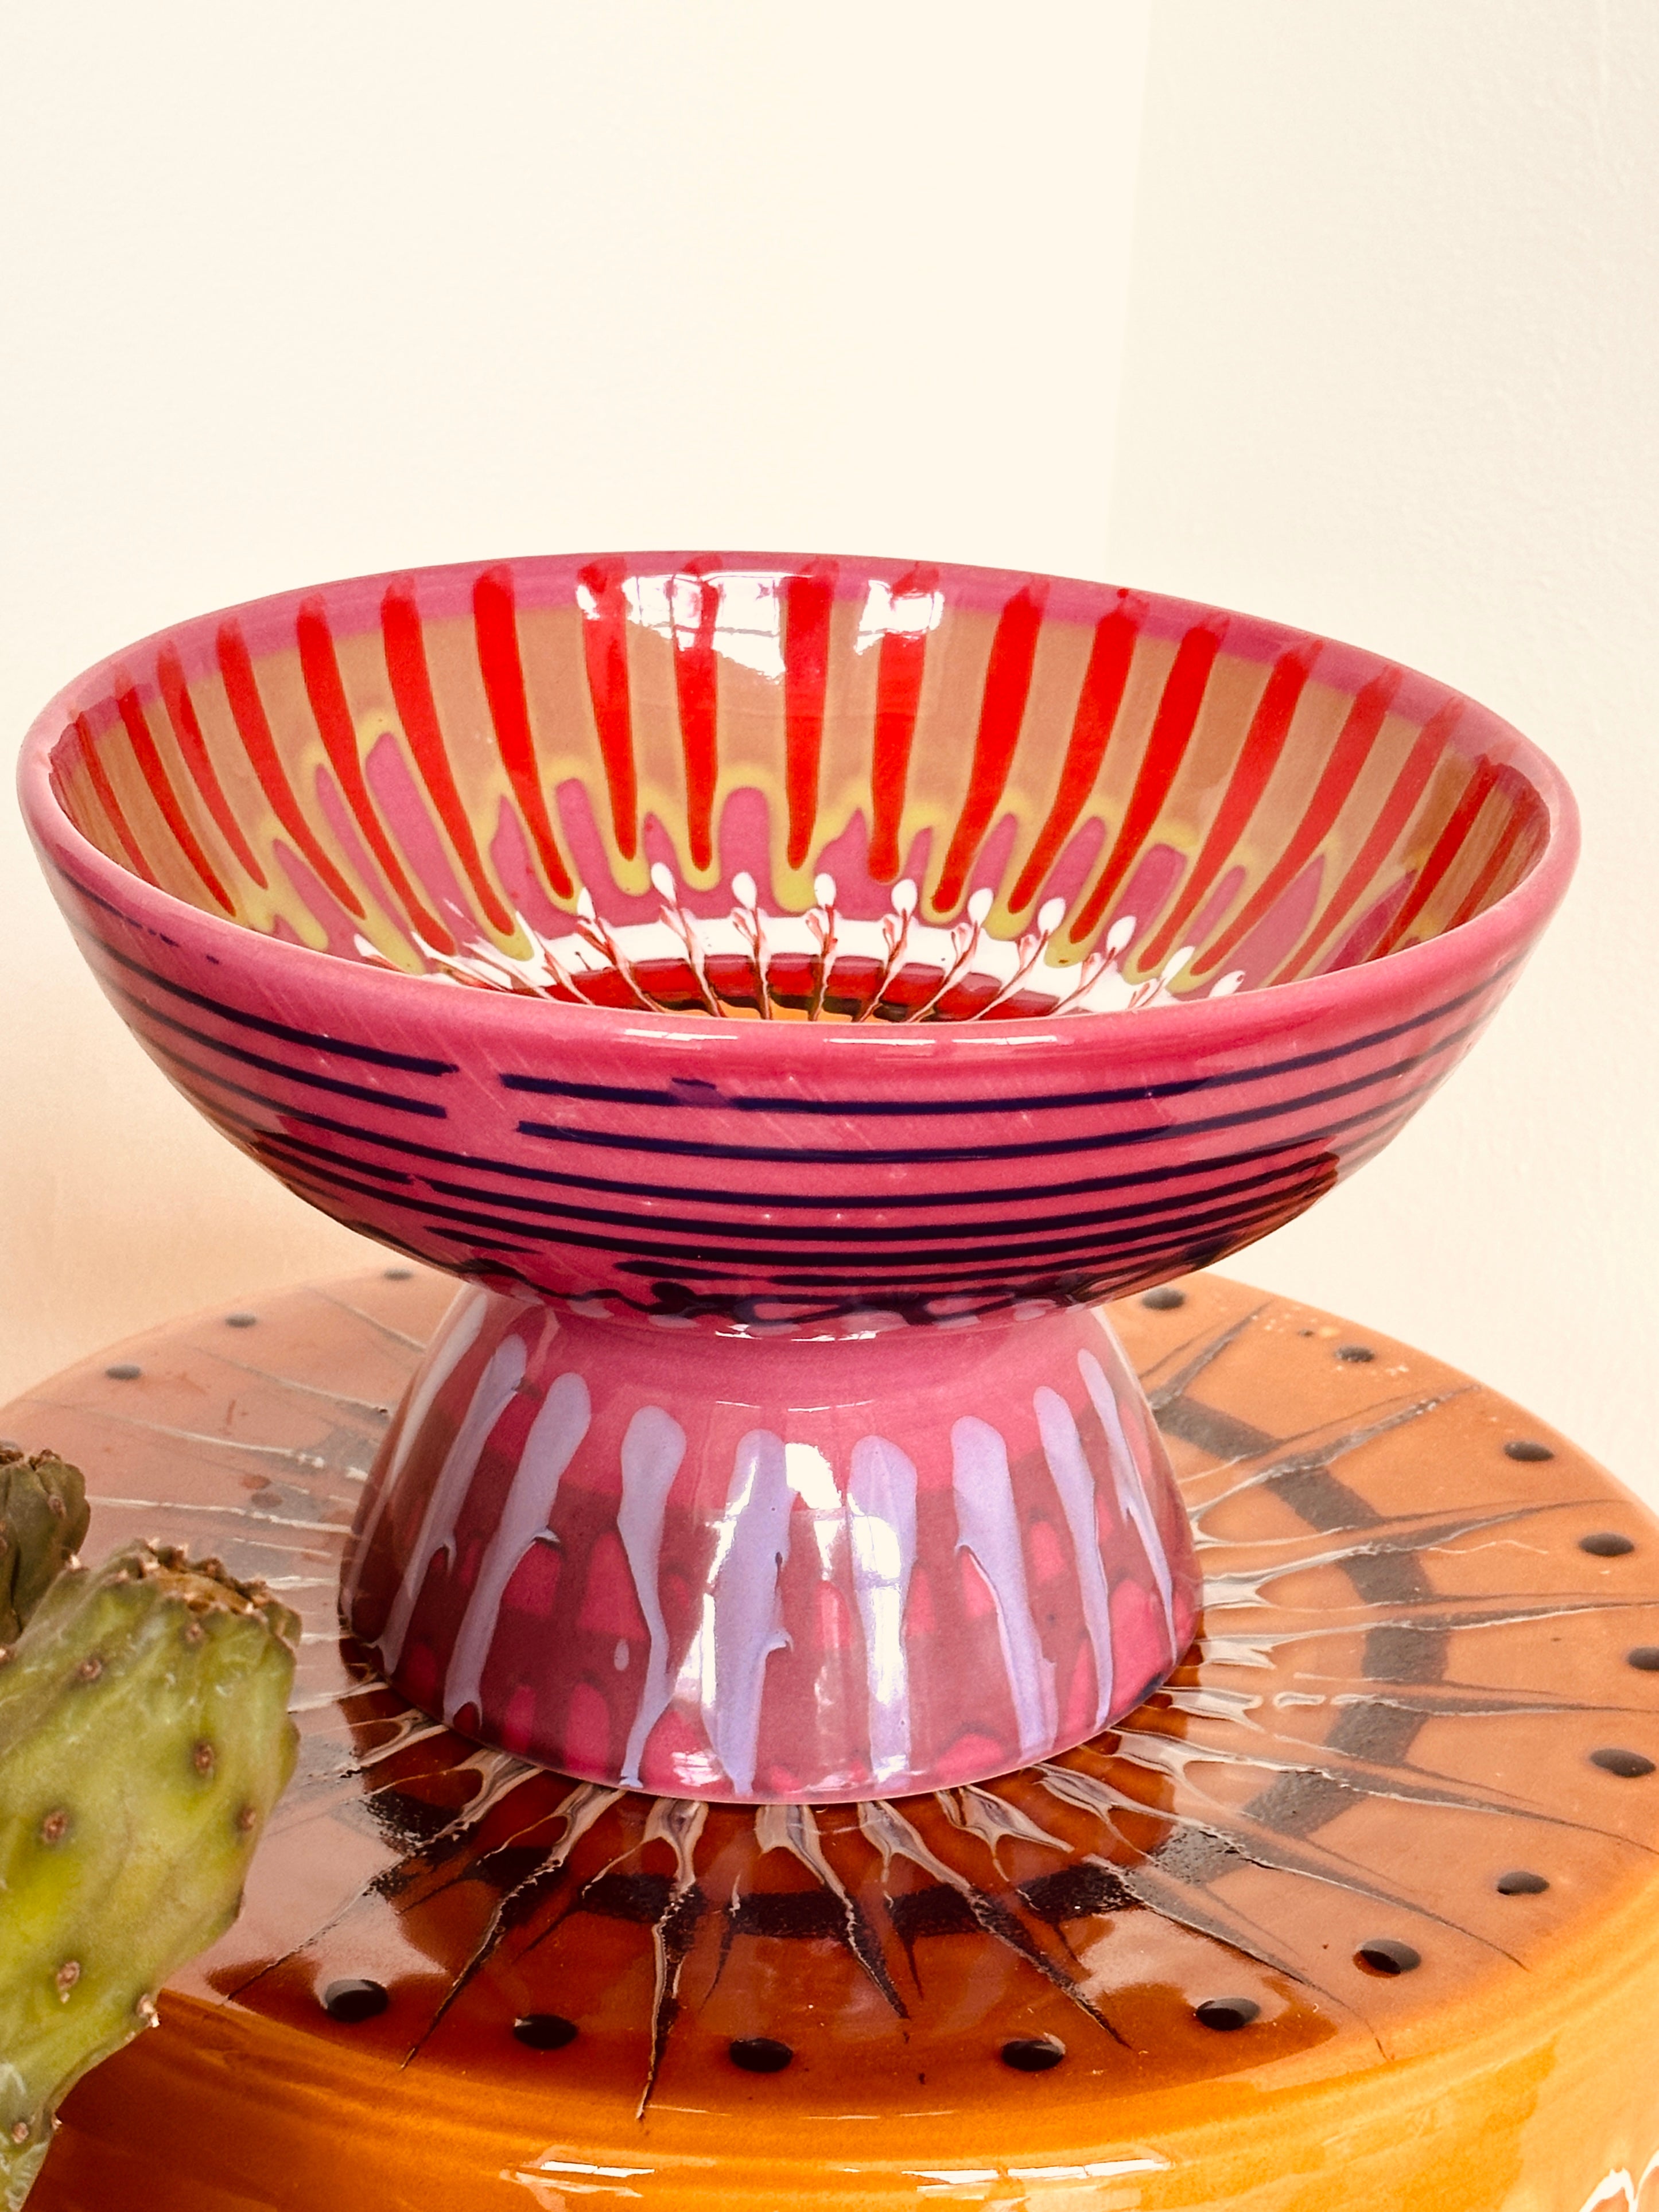 Psychodelic High Bowl  "Fuxia with Amore Mio"